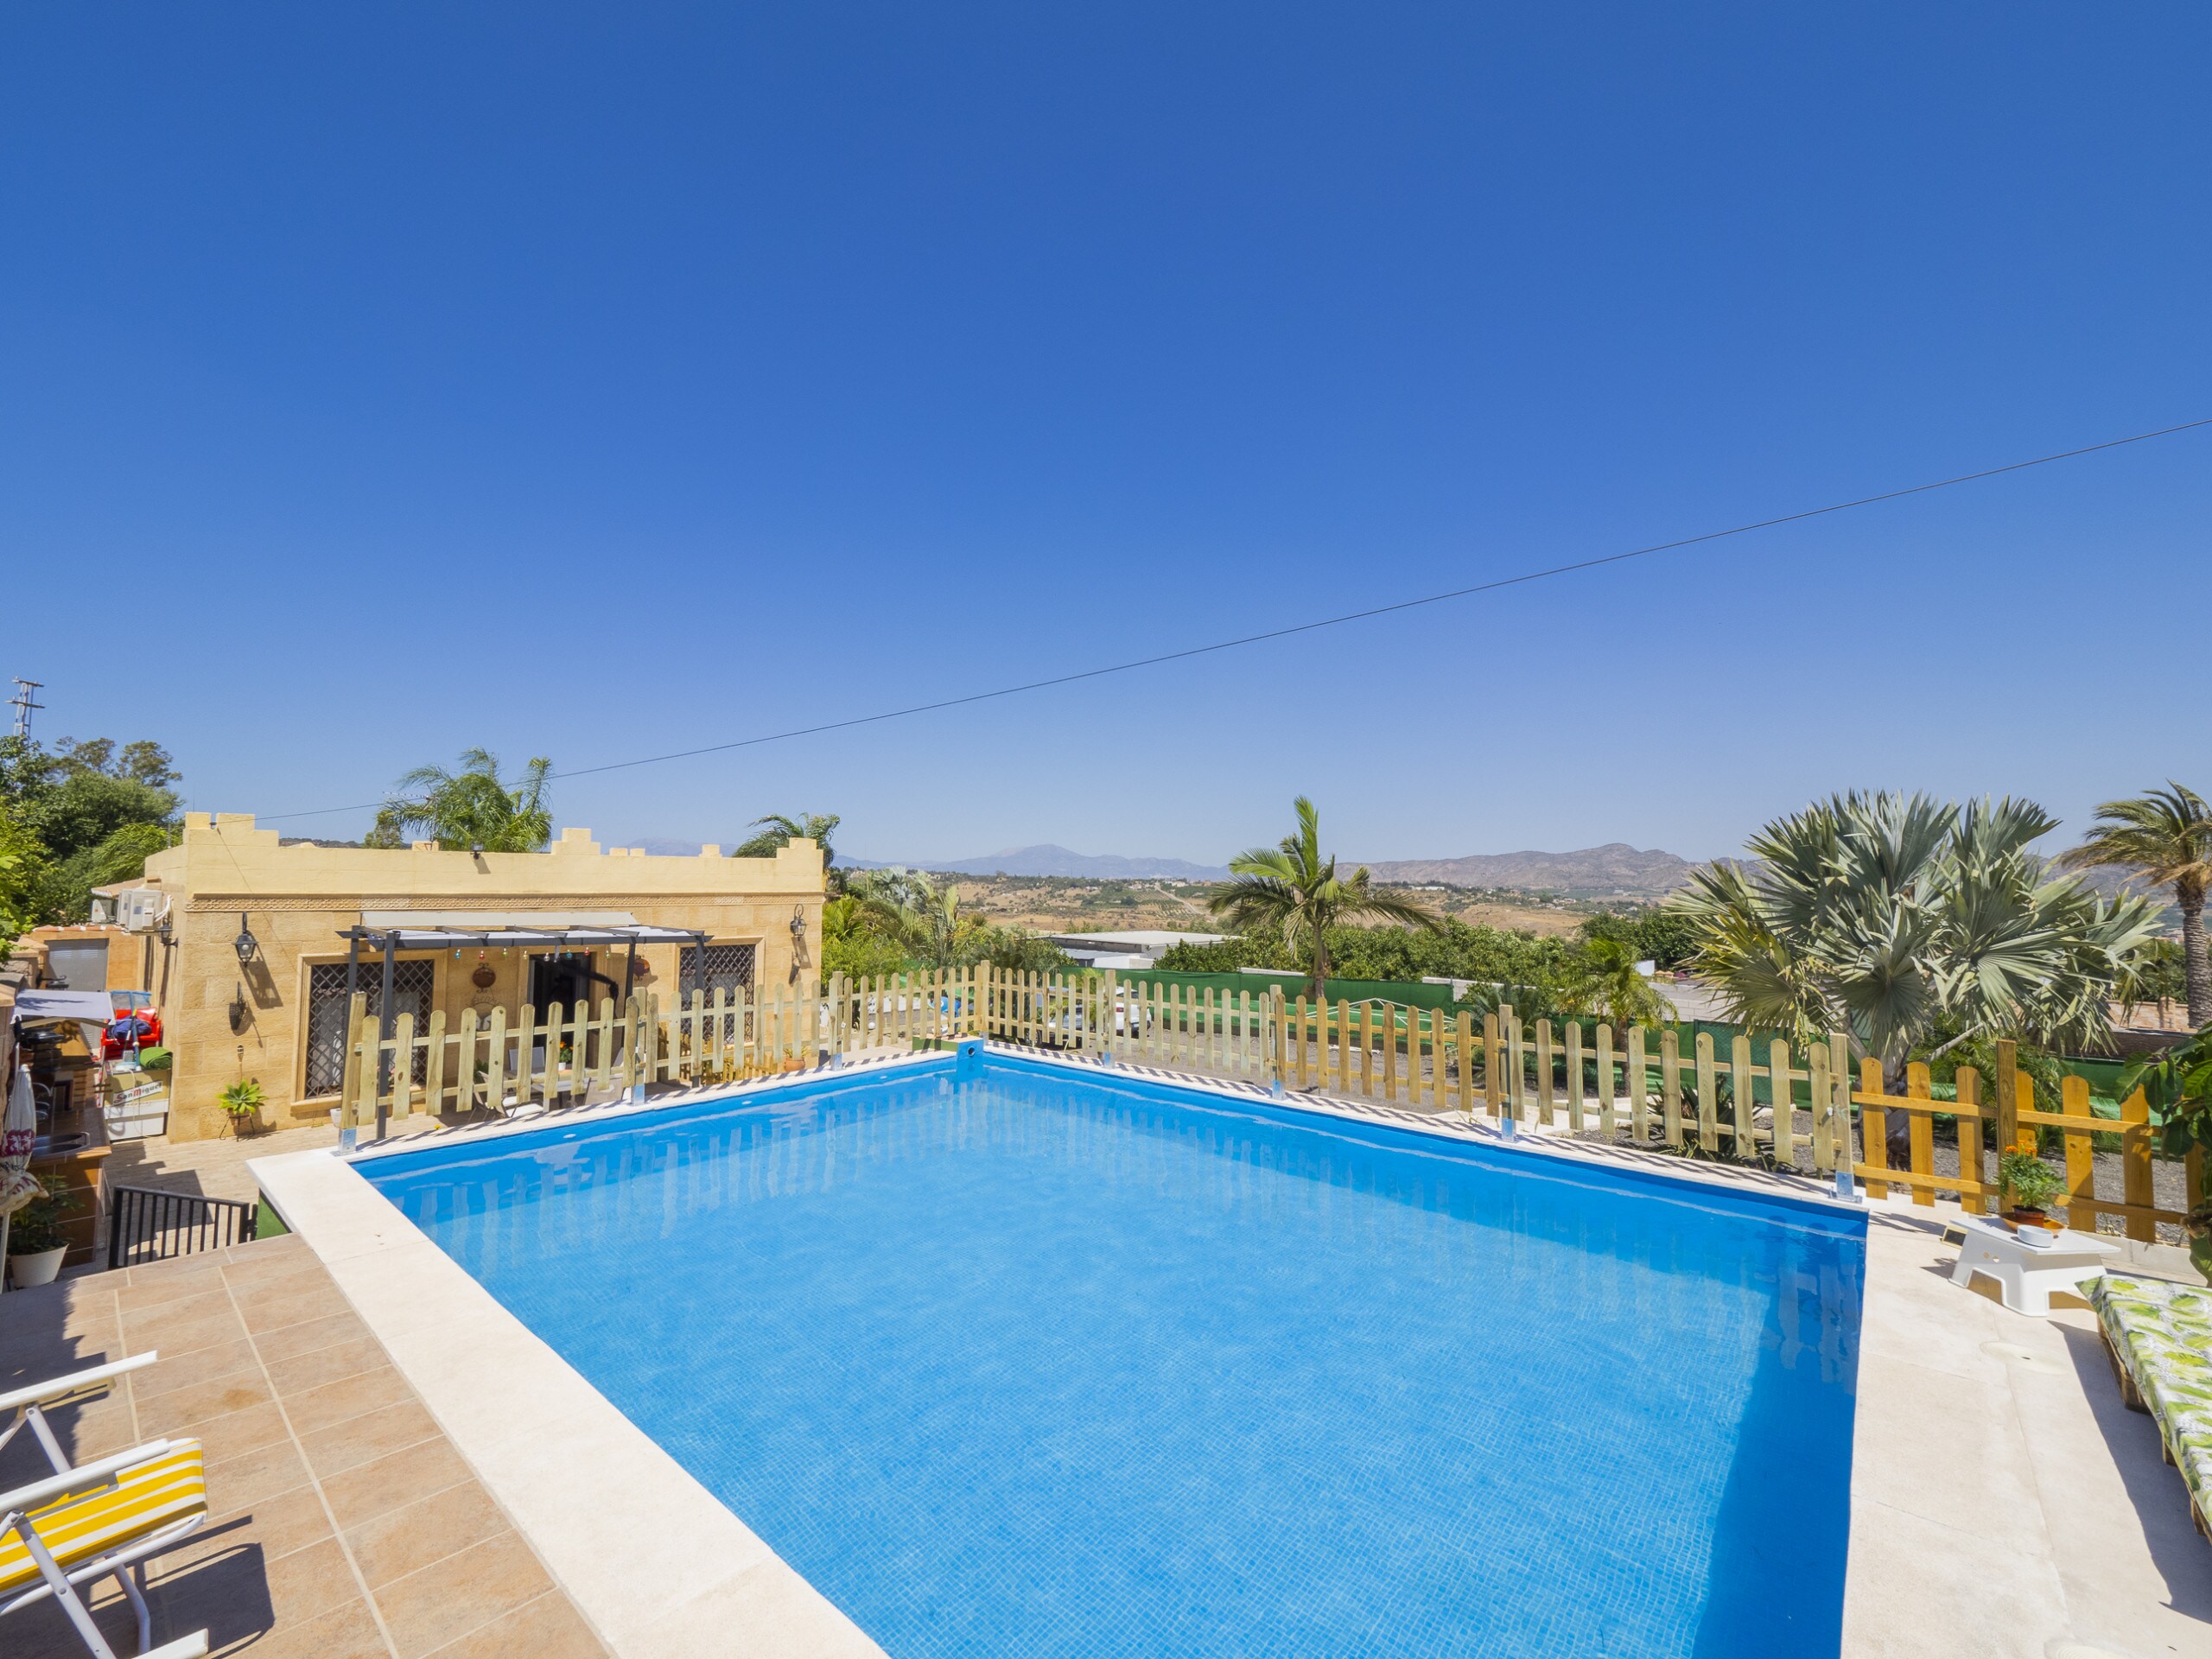 Enjoy the pool of this country house in Alhaurín de la torre